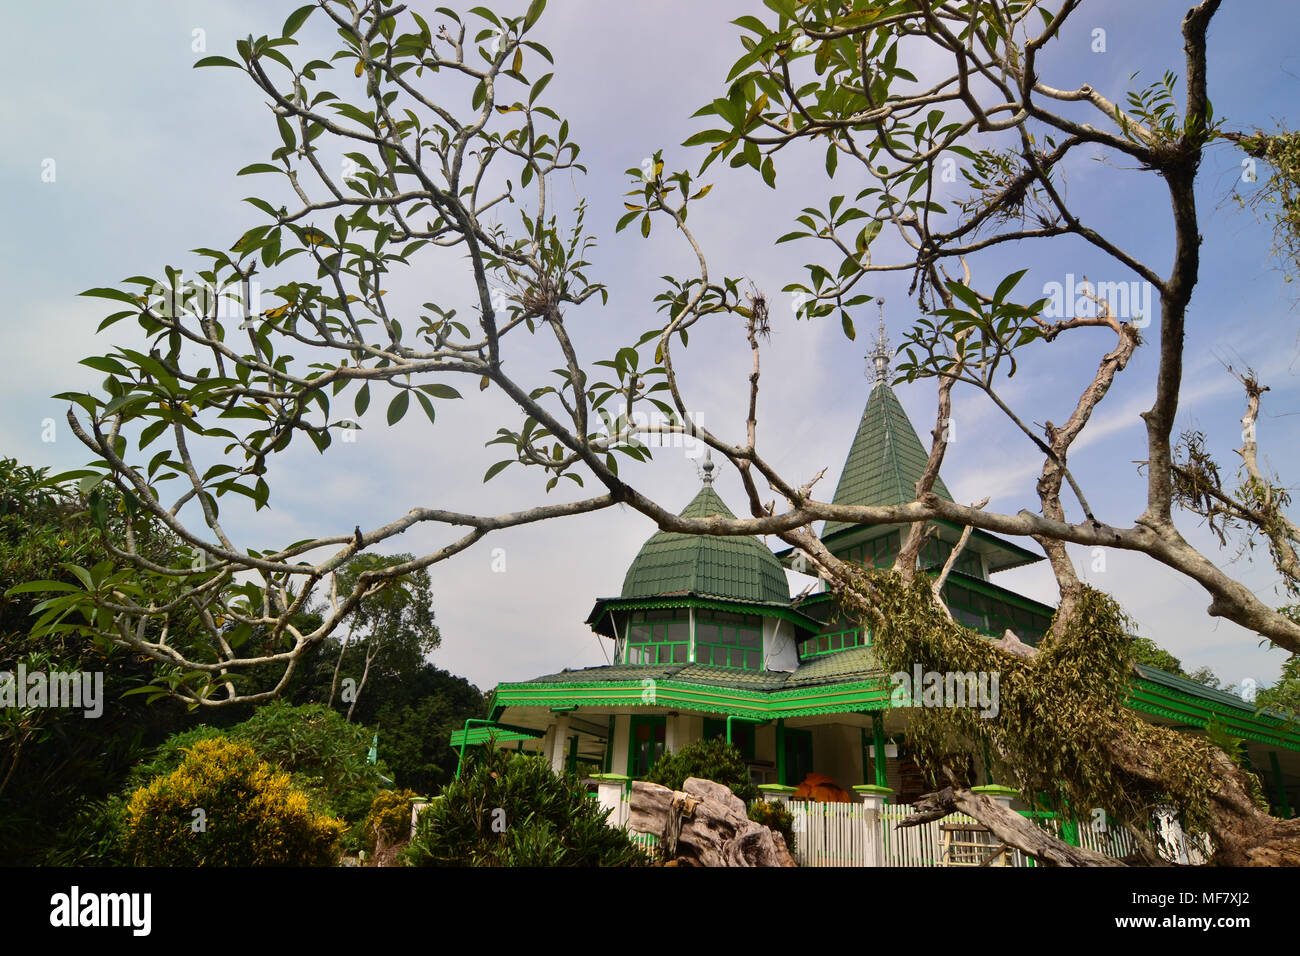 the traditional mosque built in 1625, is the second oldest mosque in South Kalimantan, Indonesia Stock Photo